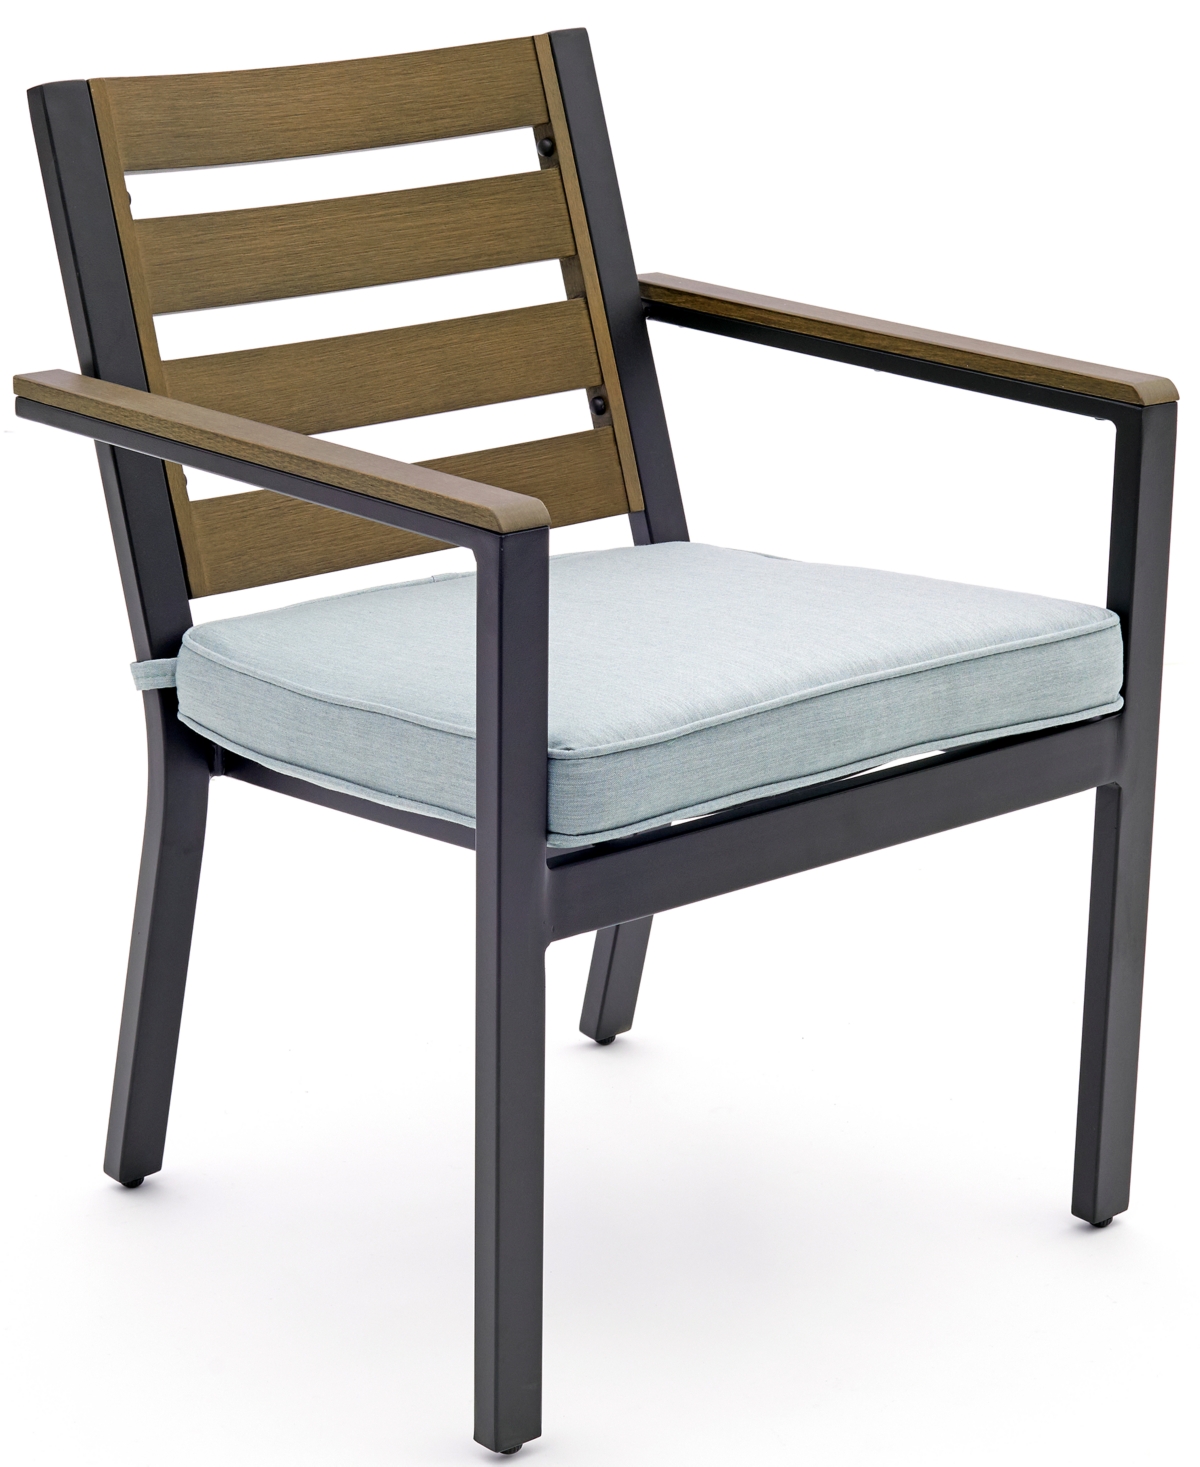 10397493 Stockholm Outdoor Dining Chair, Created for Macys sku 10397493